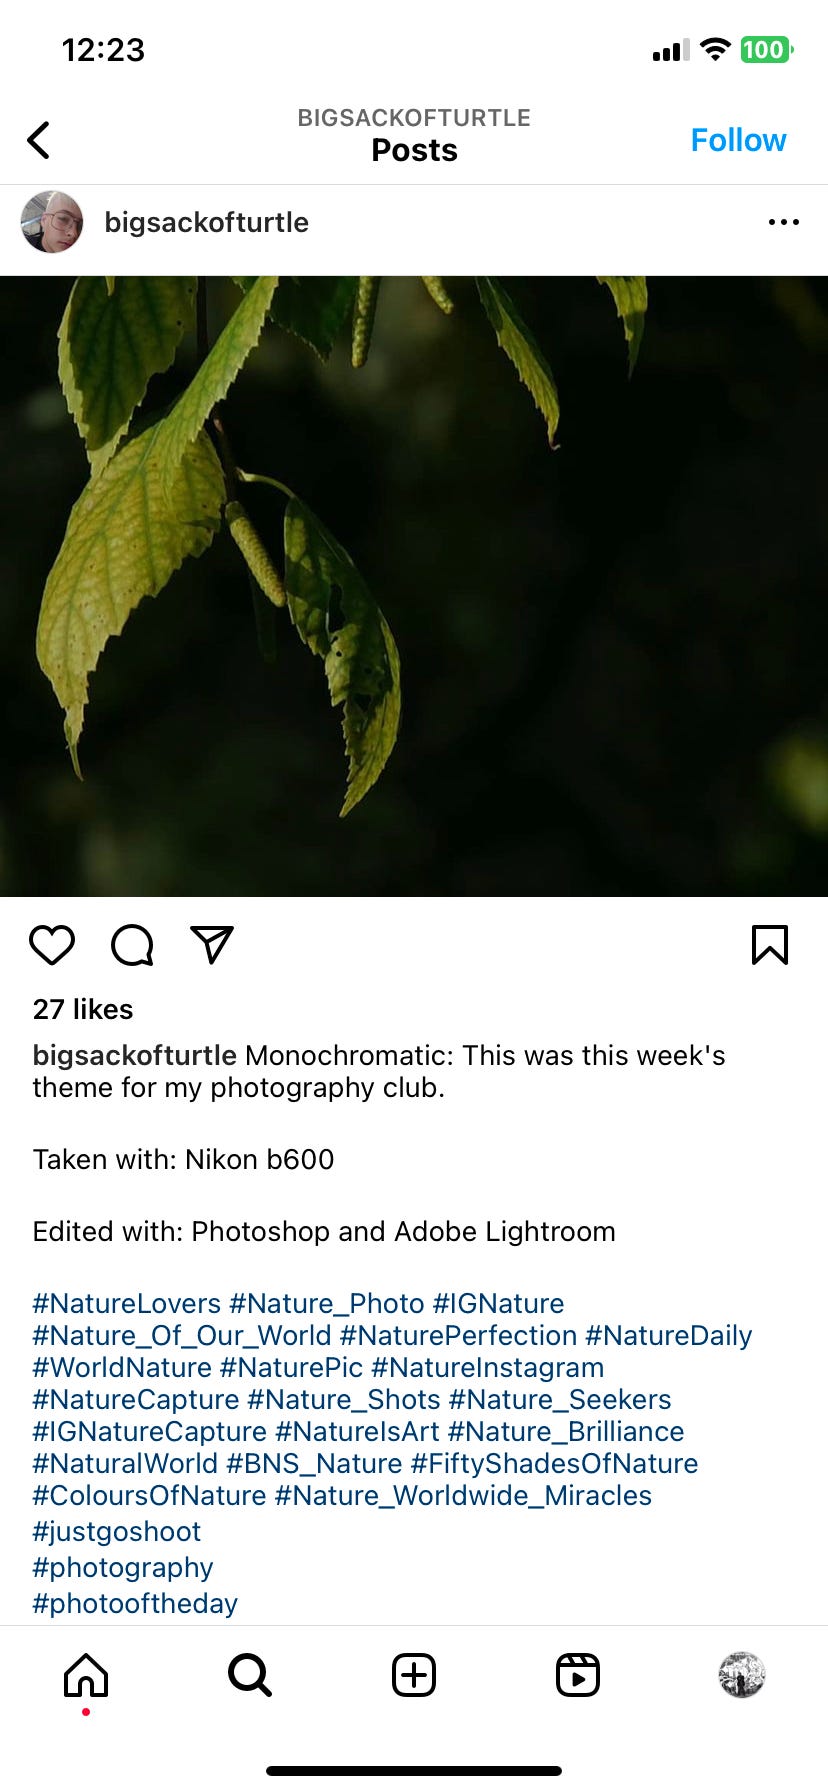 Screenshots show photos shared on David Kleeba's instagram page. He enjoyed photographing plants, architecture and his friends.